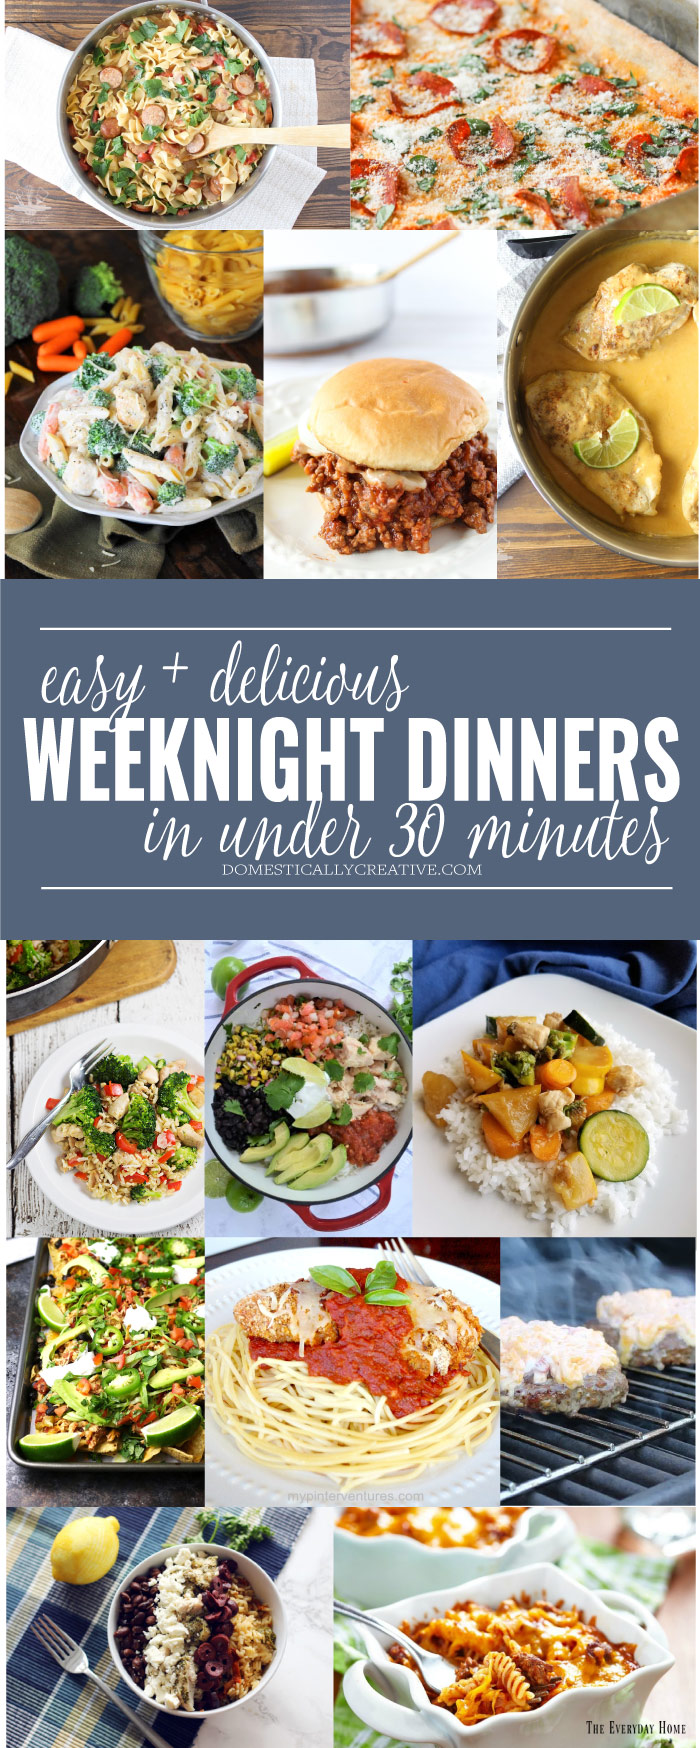 Quick and delicious dinner ideas that are ready in 30 minutes or less